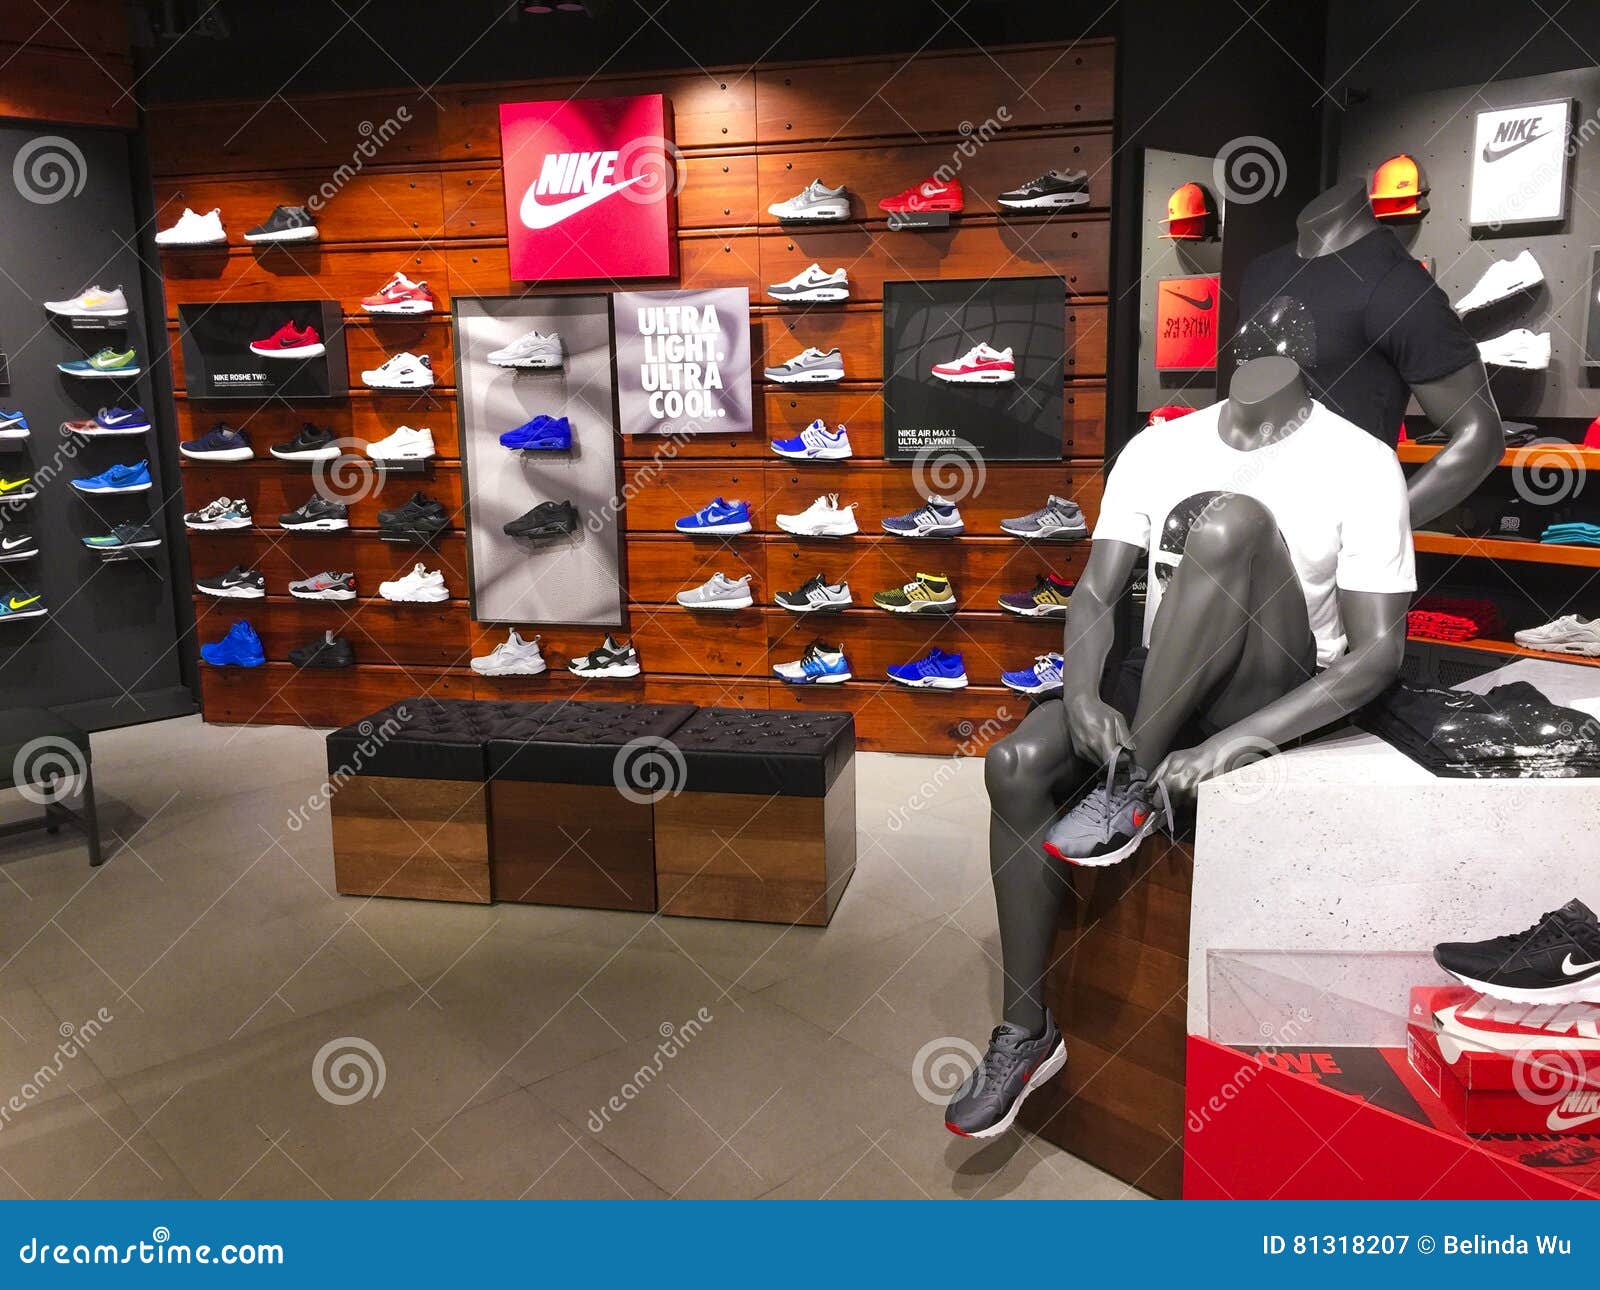 shoes nike store